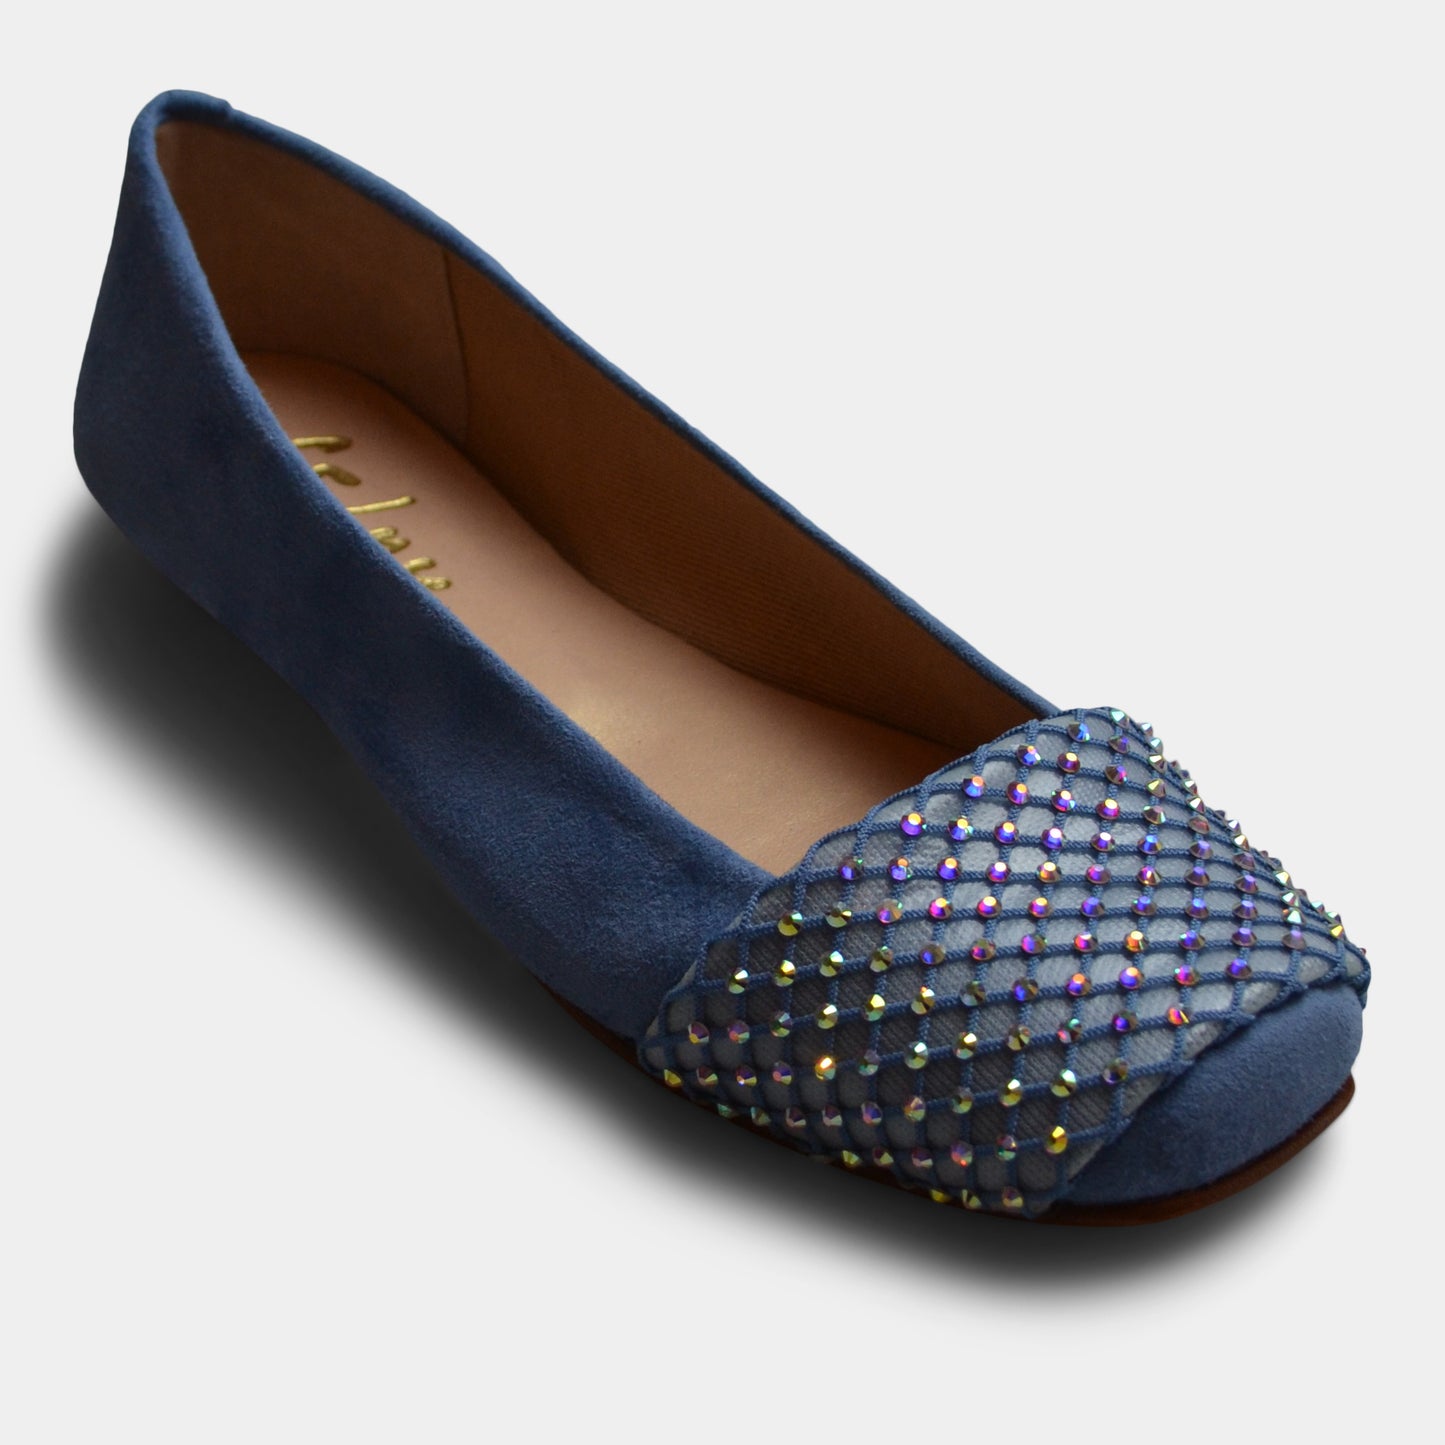 FRENCH SOLE SUEDE FLAT IN BLUE